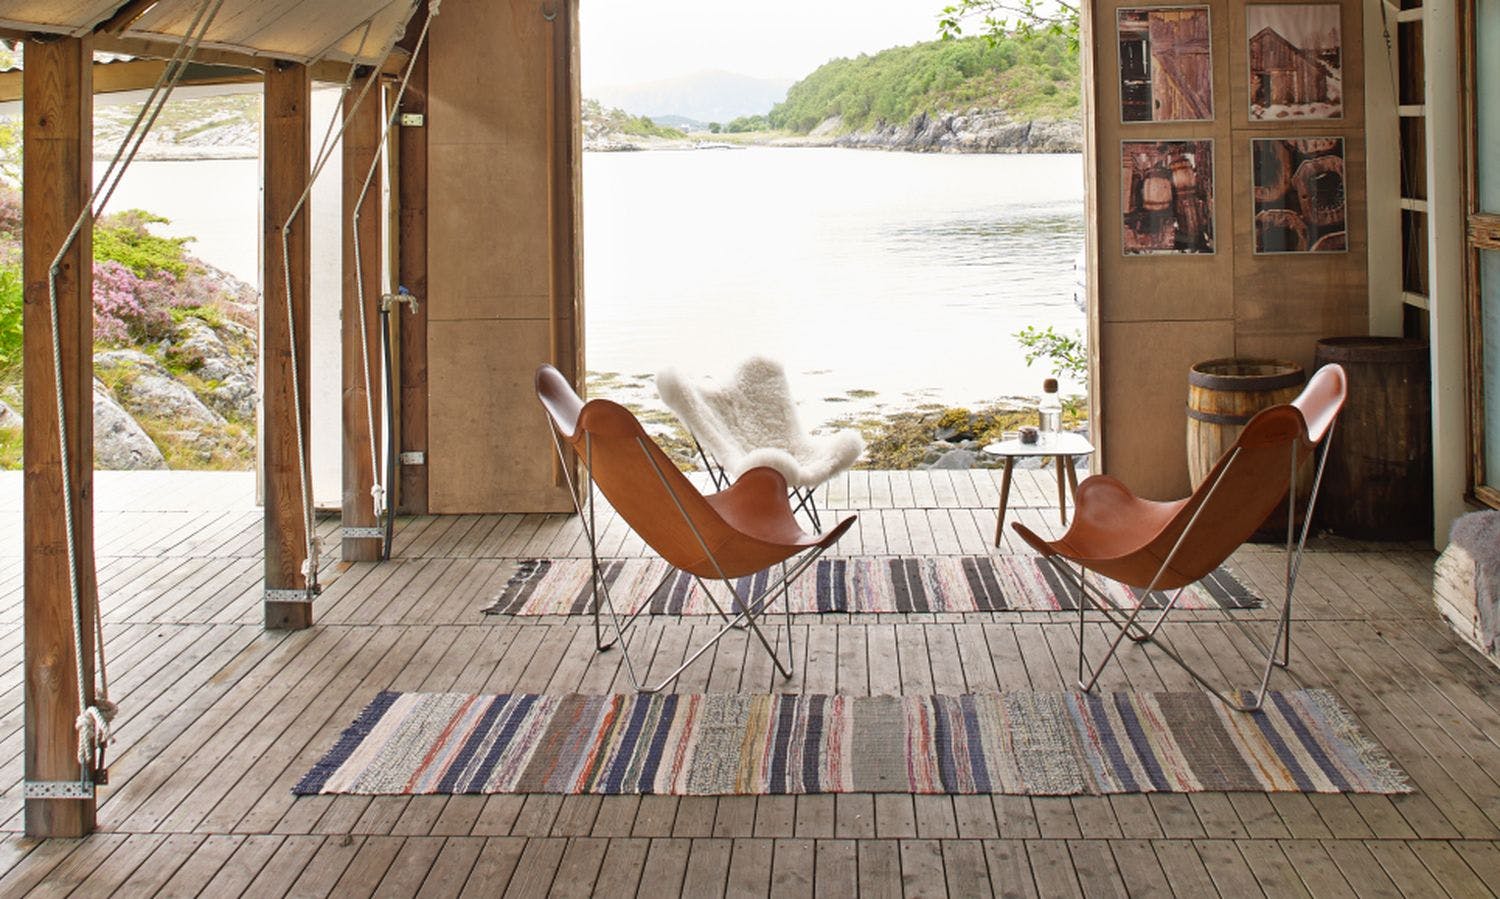 Two leather butterfly chairs and one sheepskin bkf in Norwegian fjord house